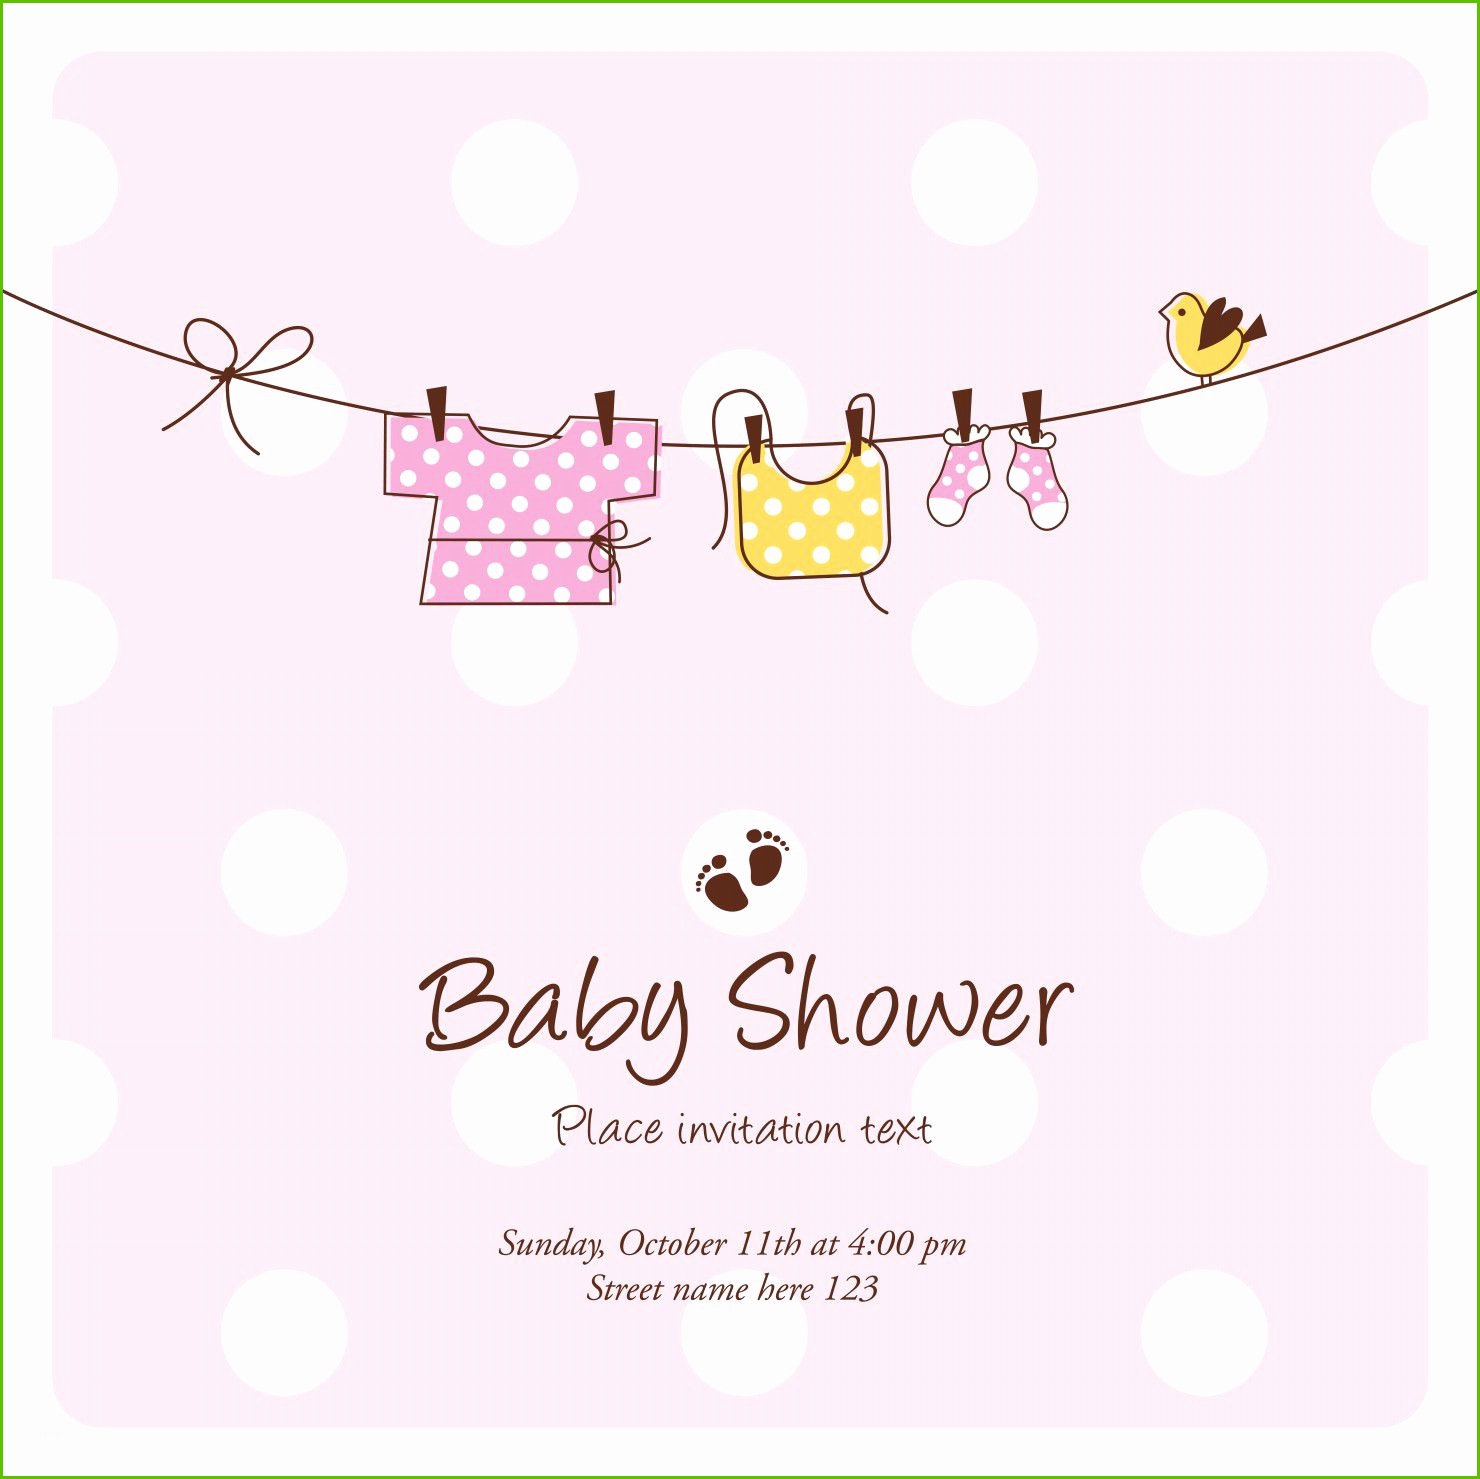 Full Size of Baby Shower:graceful Baby Shower Cards Image Designs 51 Amazing Ideas Of Do You Write On A Baby Shower Card Baby 51 Amazing Ideas Of Do You Write On A Baby Shower Card